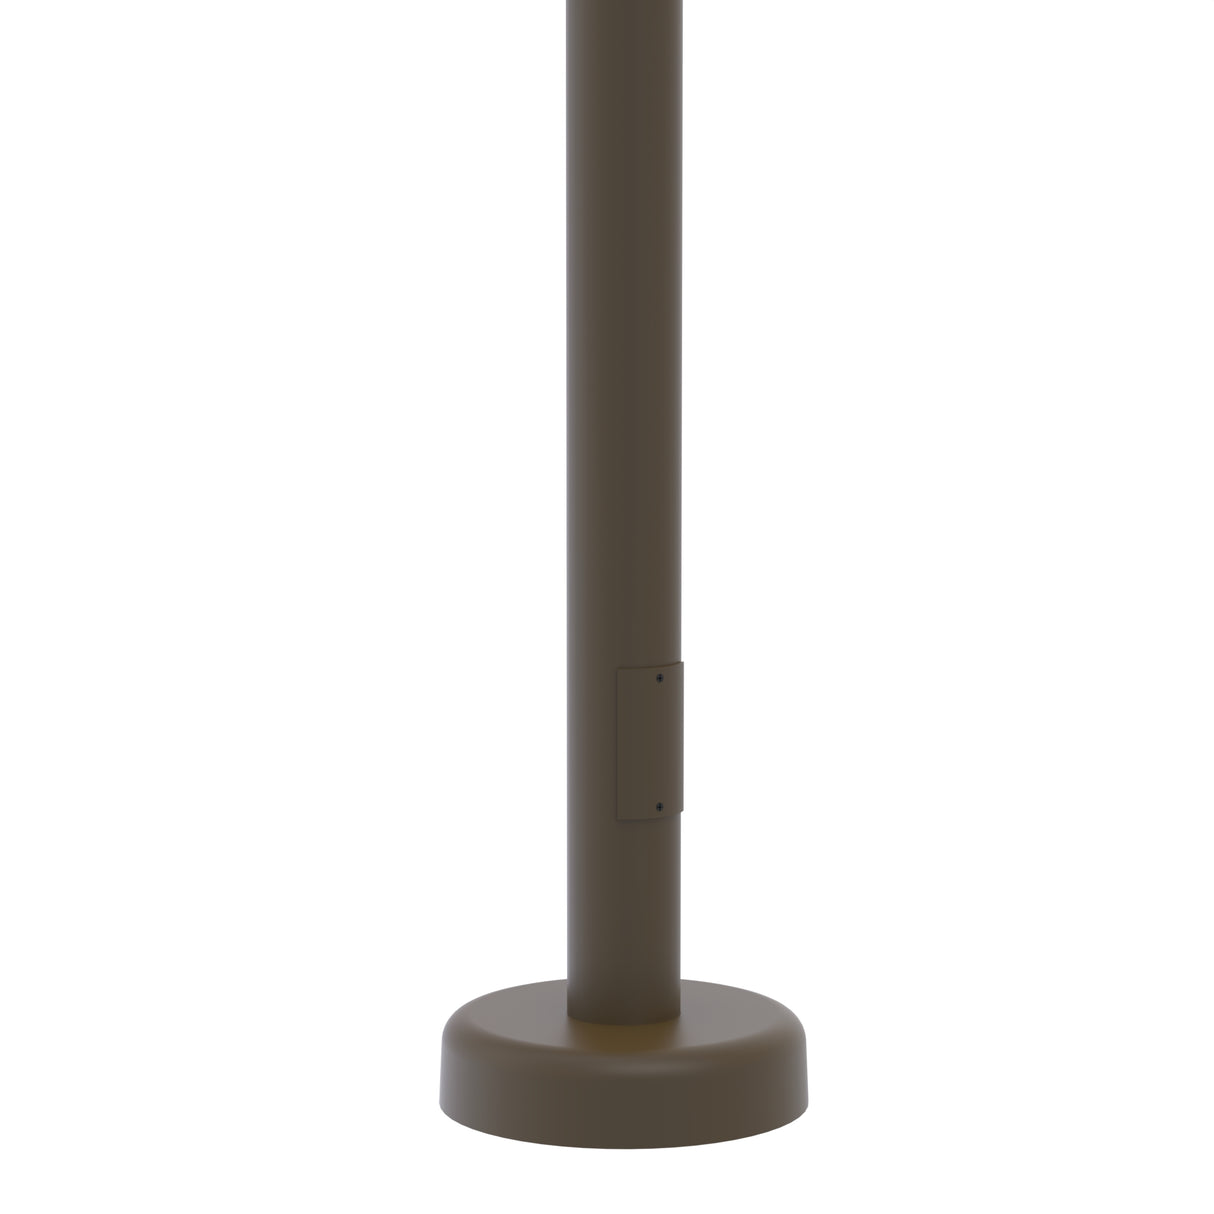 12' Tall x 5.0" OD x 0.125" Thick, Round Straight Aluminum, Hinged Anchor Base Light Pole